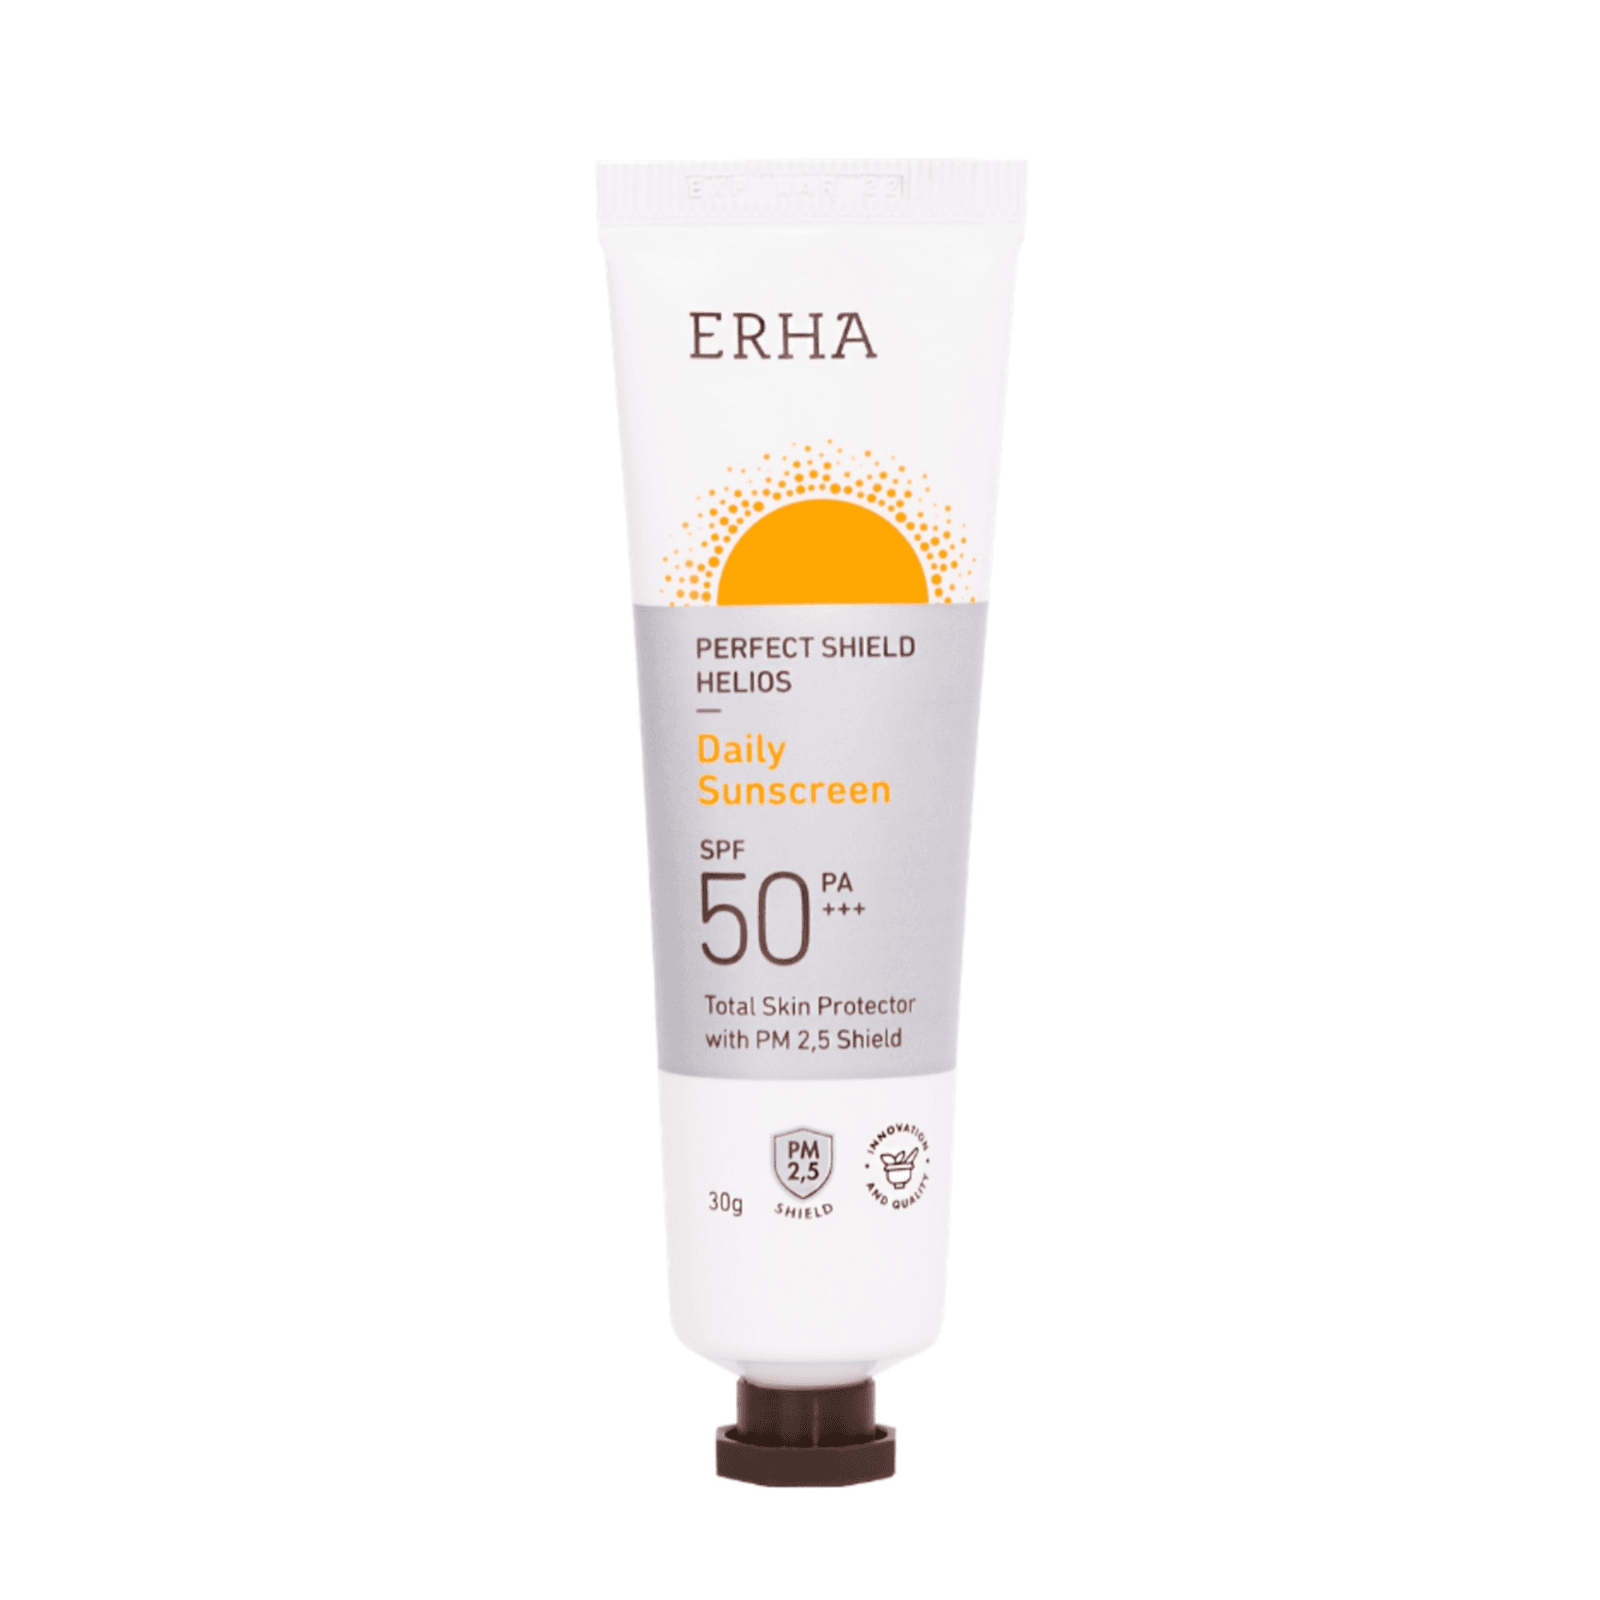 Perfect Shield Helios Daily Sunscreen SPF50 PA+++